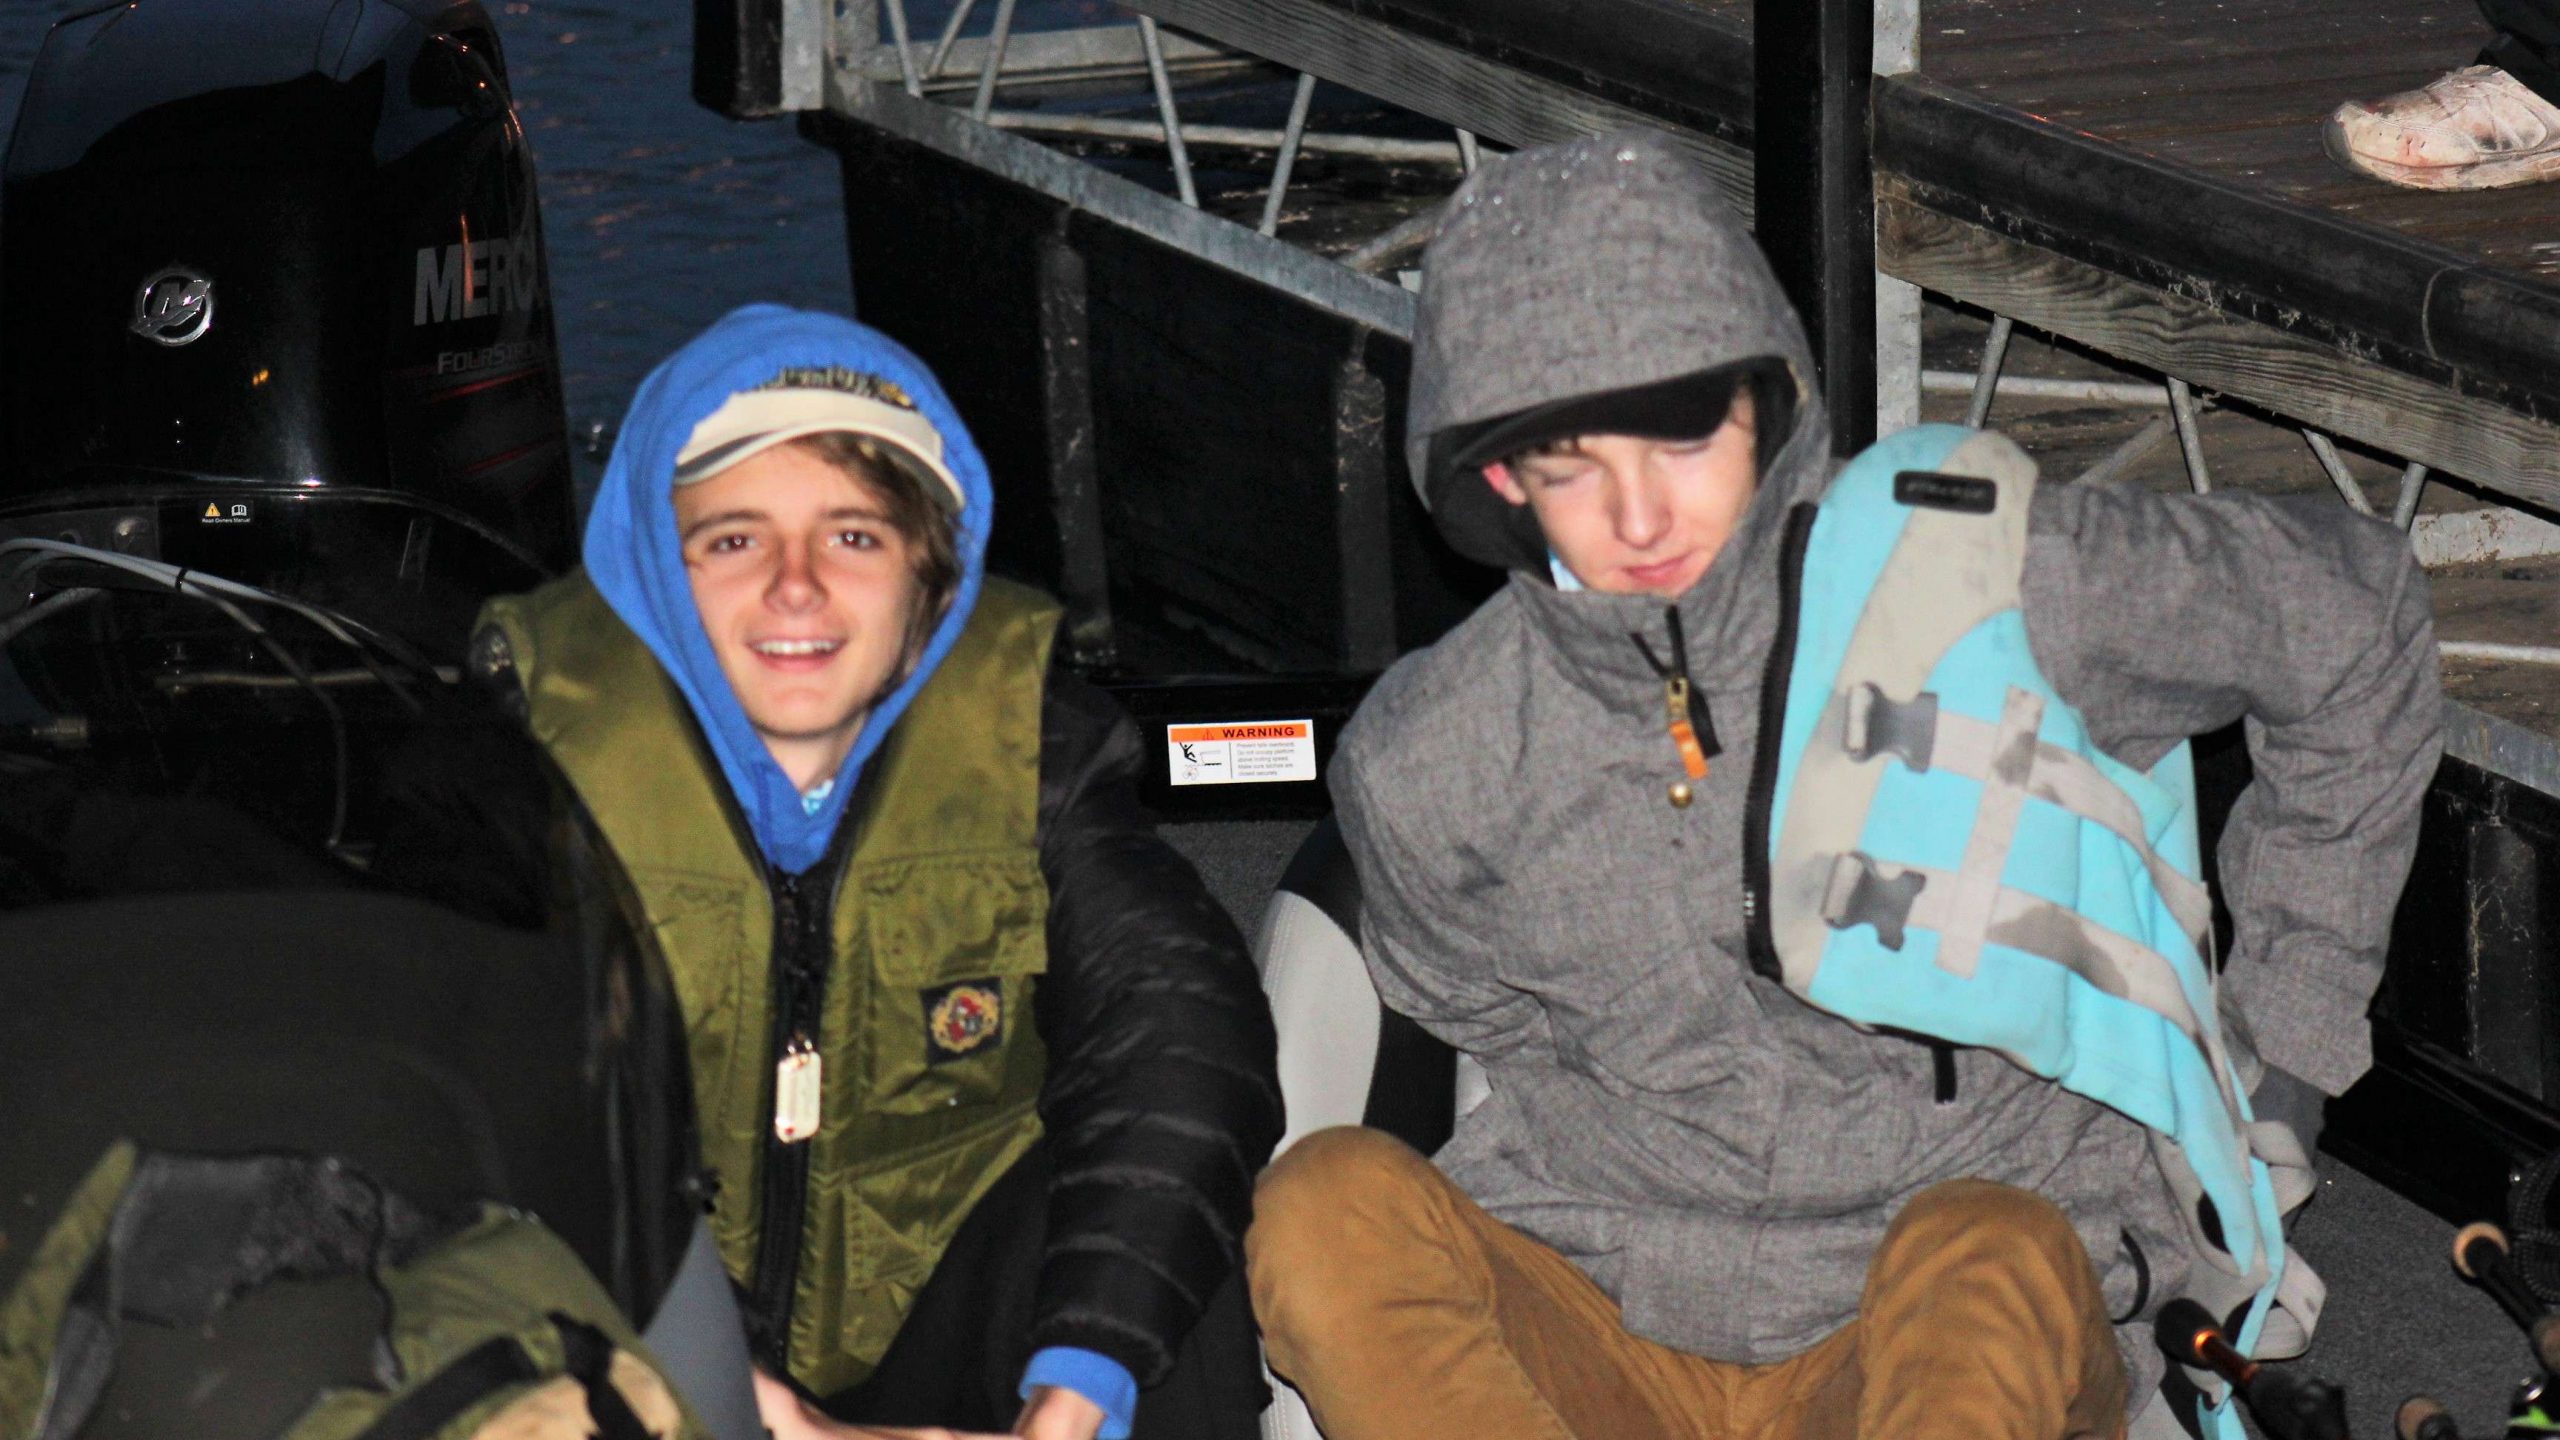  James Helfer and Drew Schrand were napping on their boat a few seconds before the camera flash startled them. They sat up long enough to smile for this photo. The boys fish with the Southeastern Bass Anglers of Indiana.
